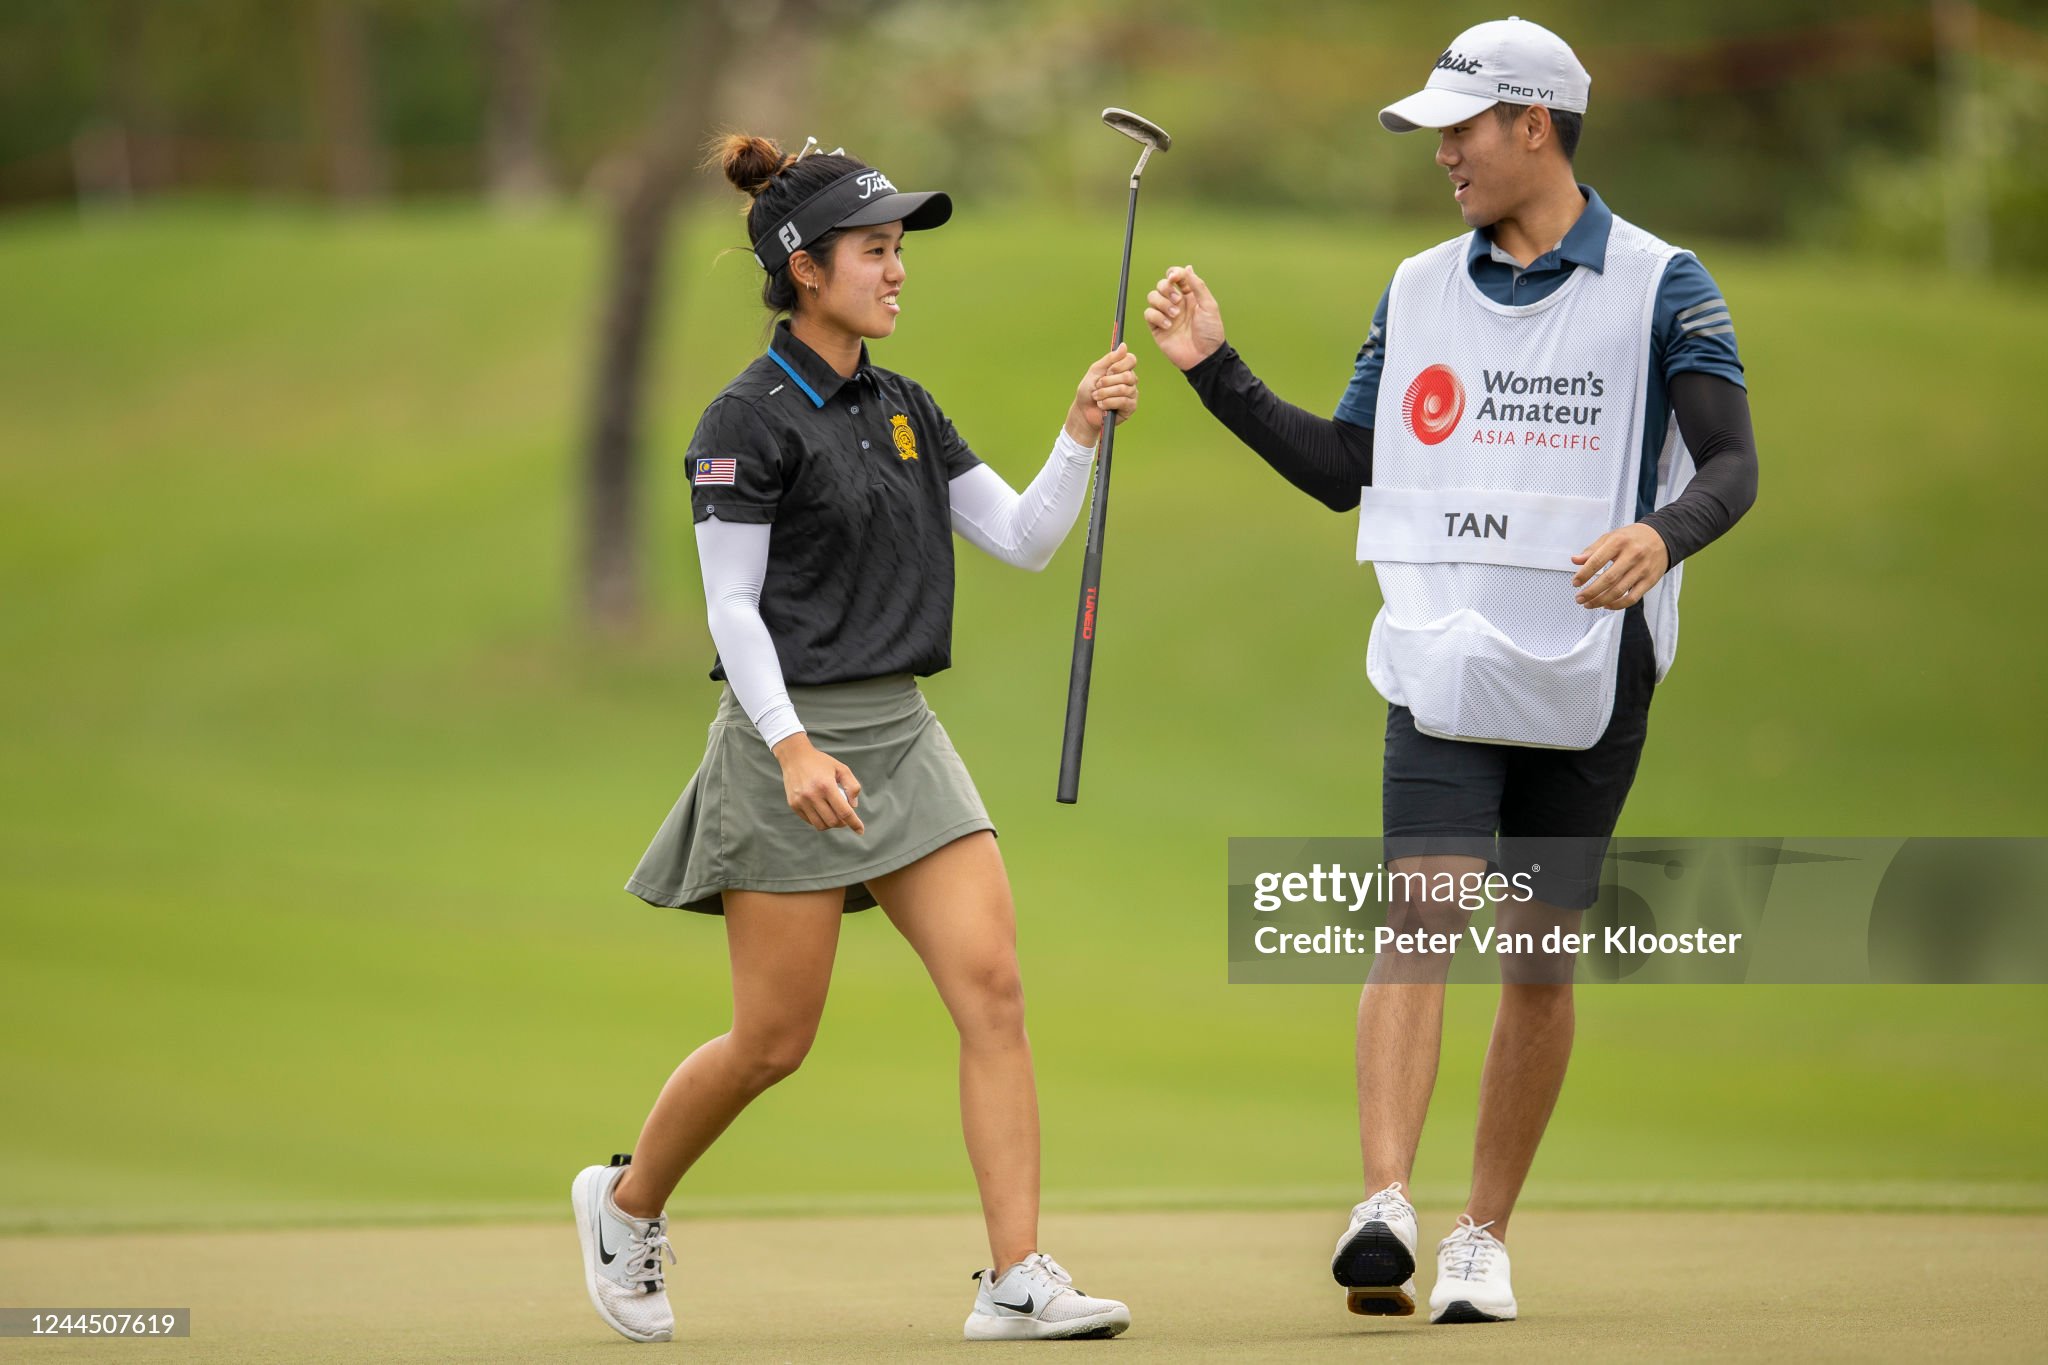 https://media.gettyimages.com/id/1244507619/photo/the-womens-amateur-asia-pacific-championship-day-three.jpg?s=2048x2048&w=gi&k=20&c=rMlRv_nfiz1-p88PFyr64QMjILY-wlYA7s4o9WeR2LM=